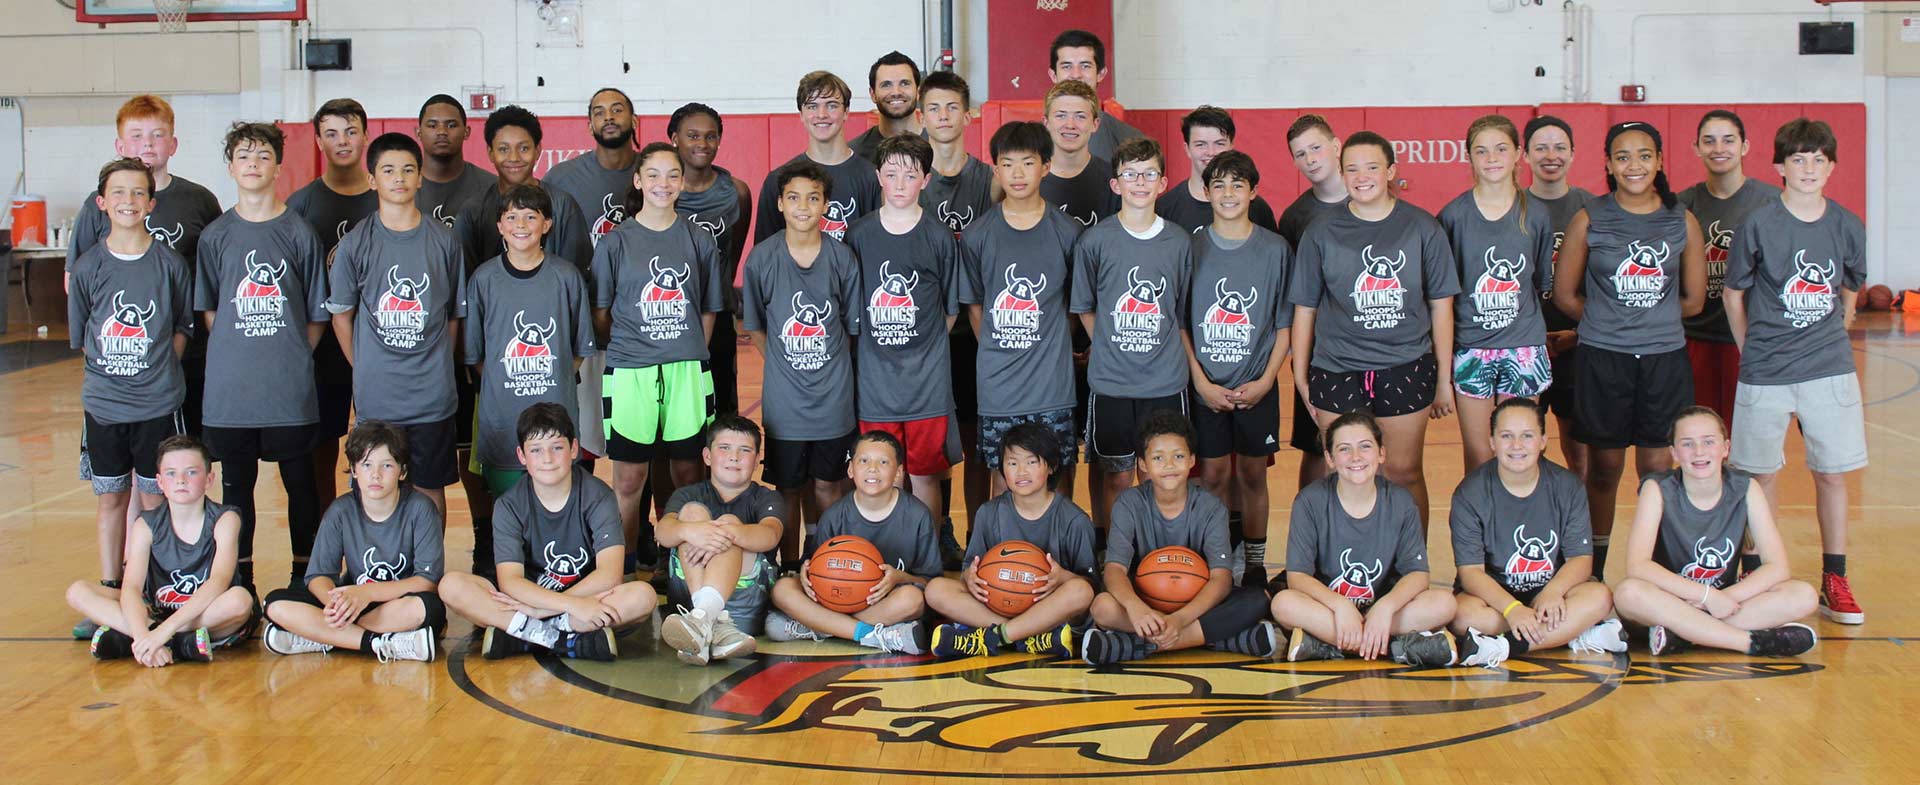 Group photo of campers from Viking Hoops Basketball Camp